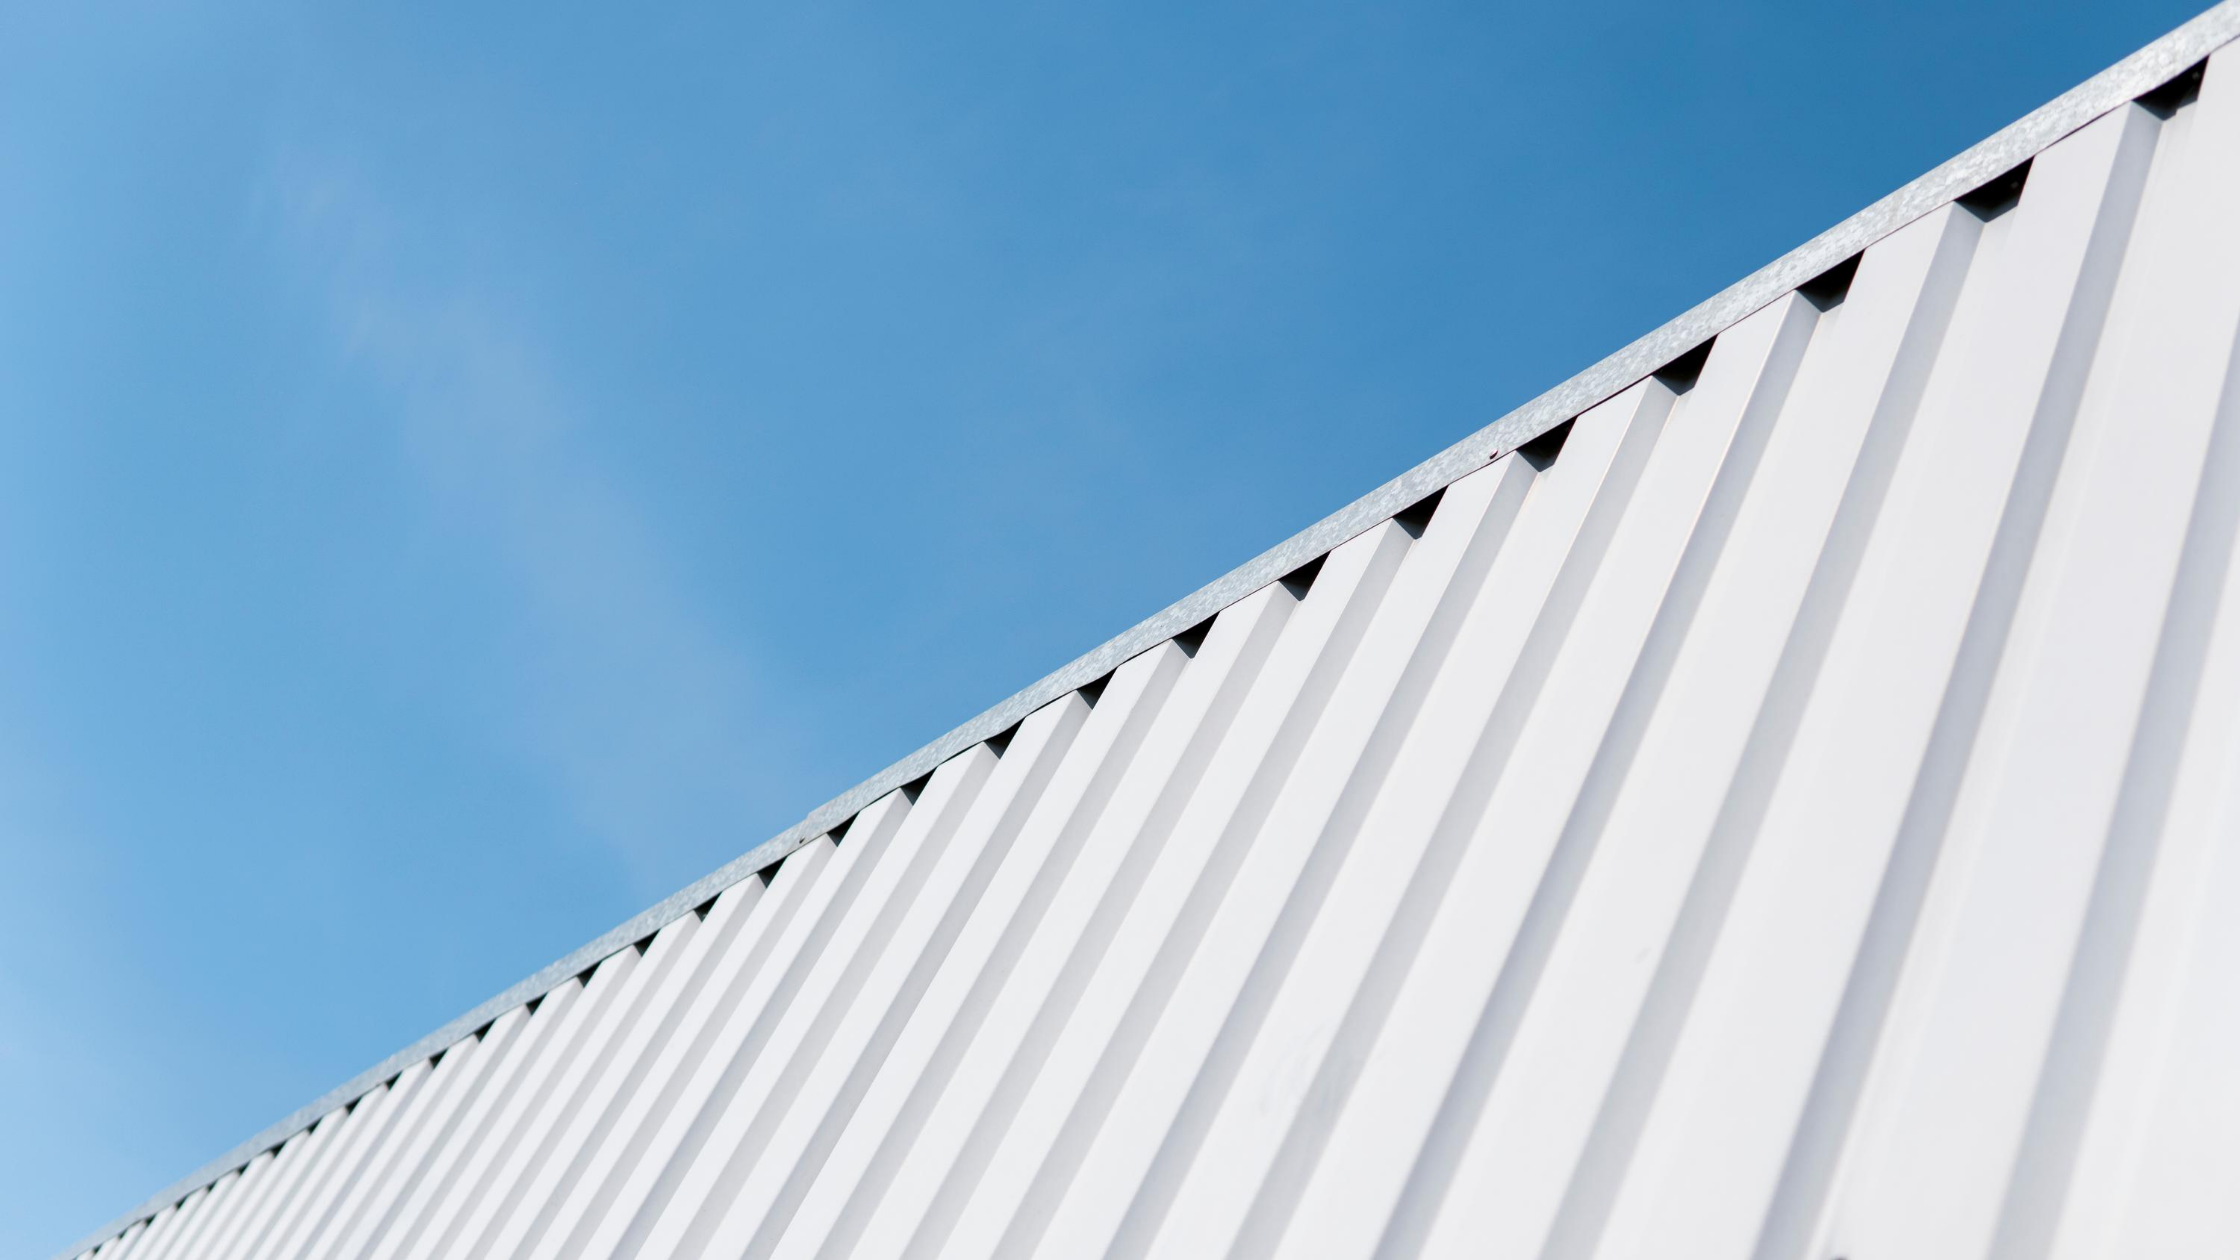 Don T Forget The Metal Roofing Trim To, Trim For Corrugated Metal Roofing